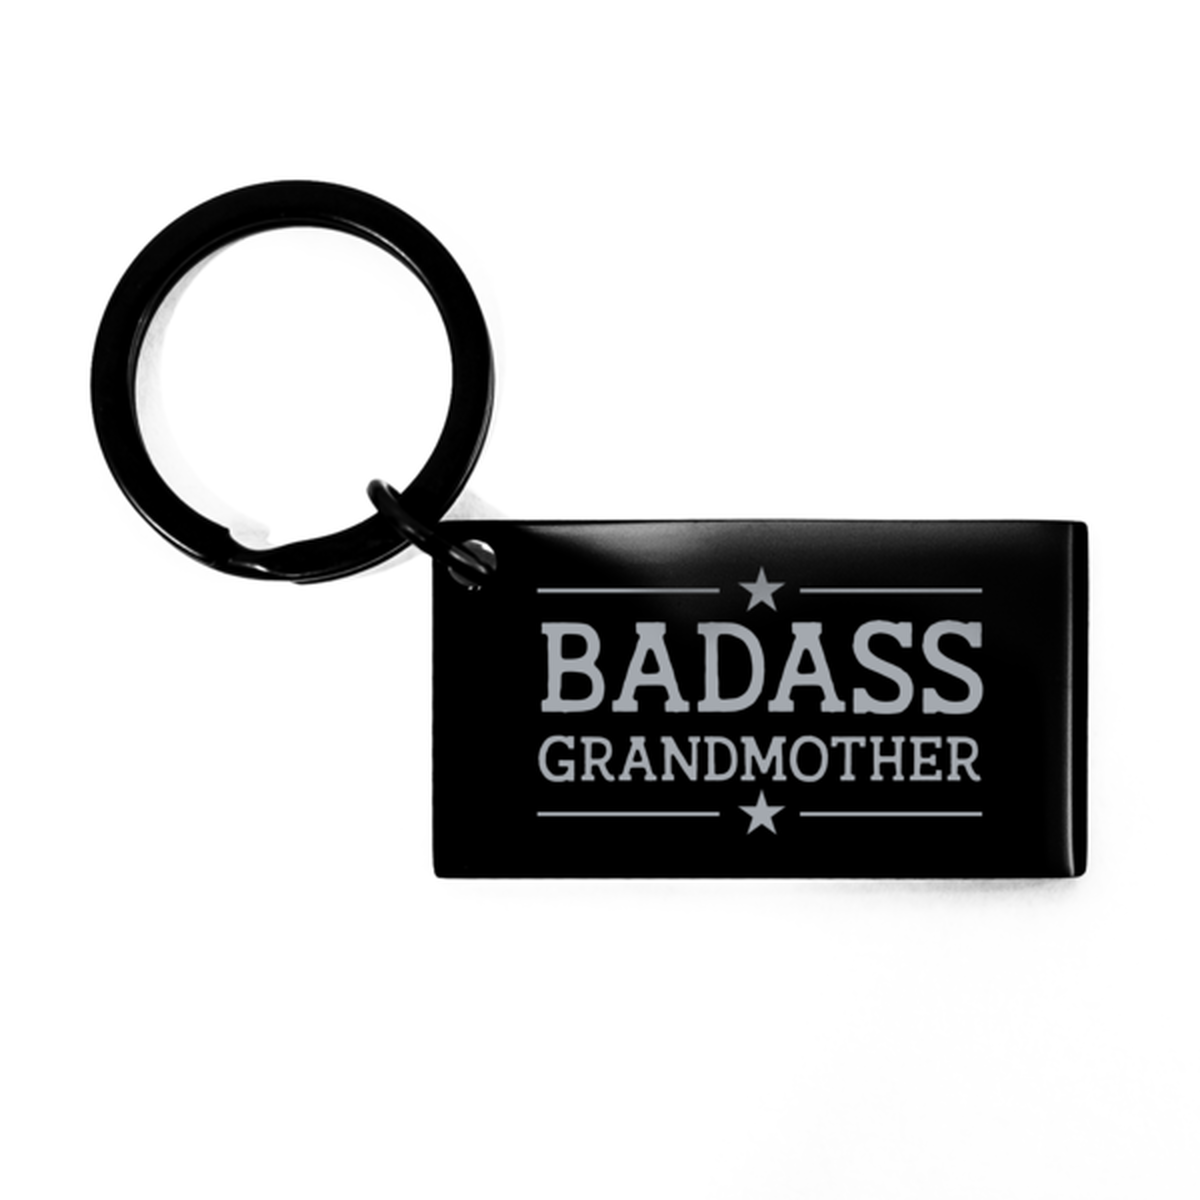 Grandmother Black Keychain, Badass Grandmother, Funny Family Gifts  Keyring For Grandmother From Granddaughter Grandson